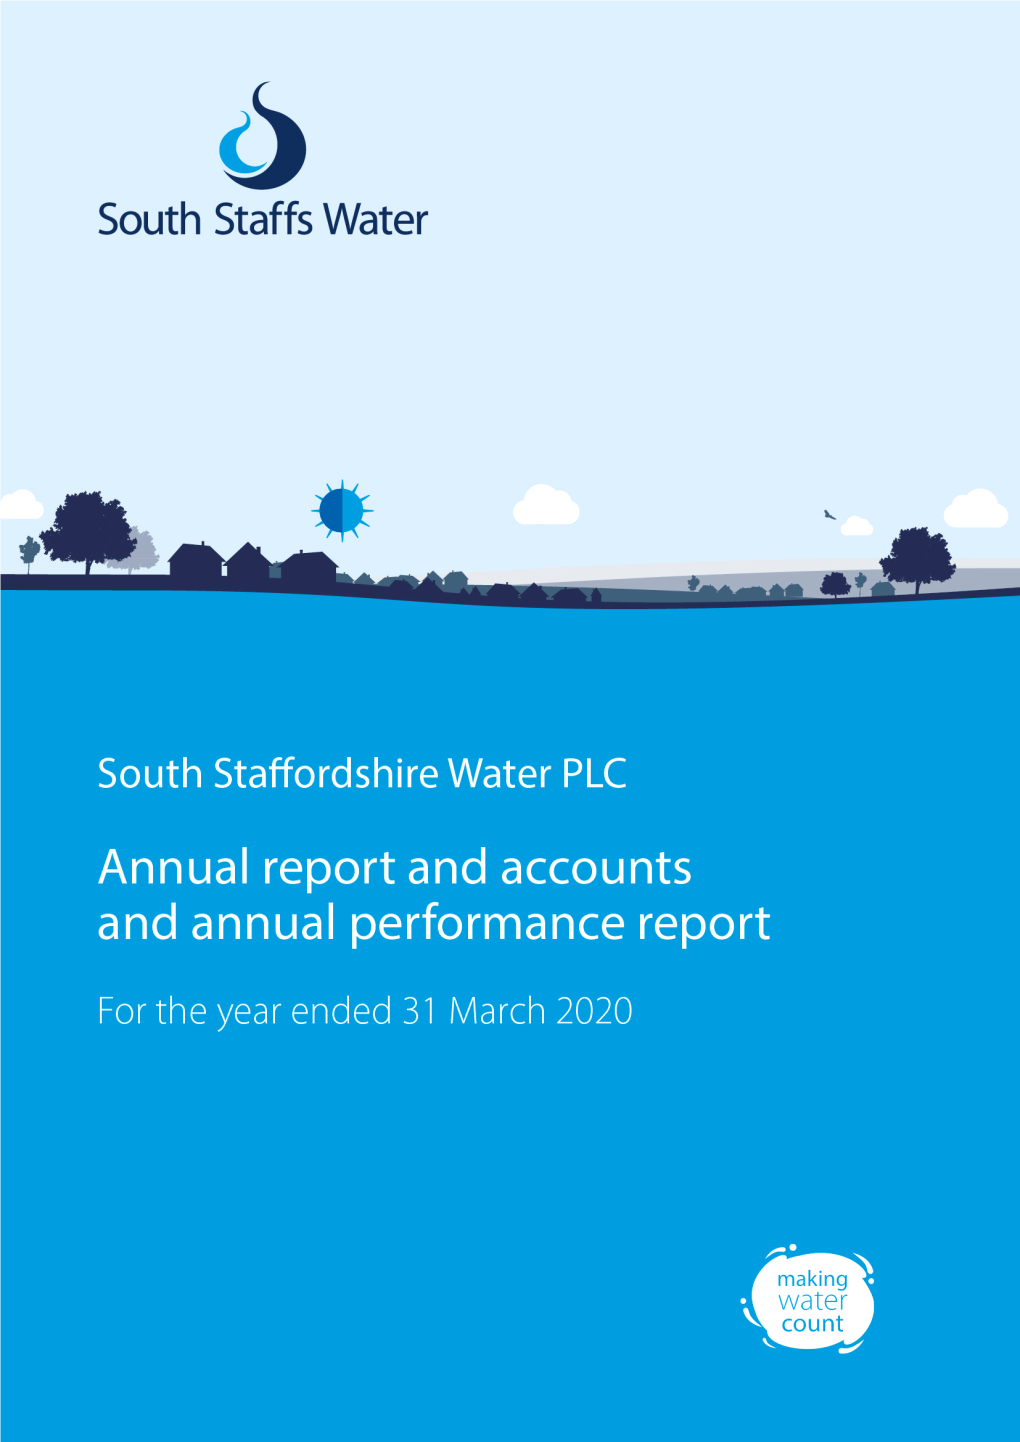 Annual Report and Accounts and Annual Performance Report Year Ended 31 March 2020